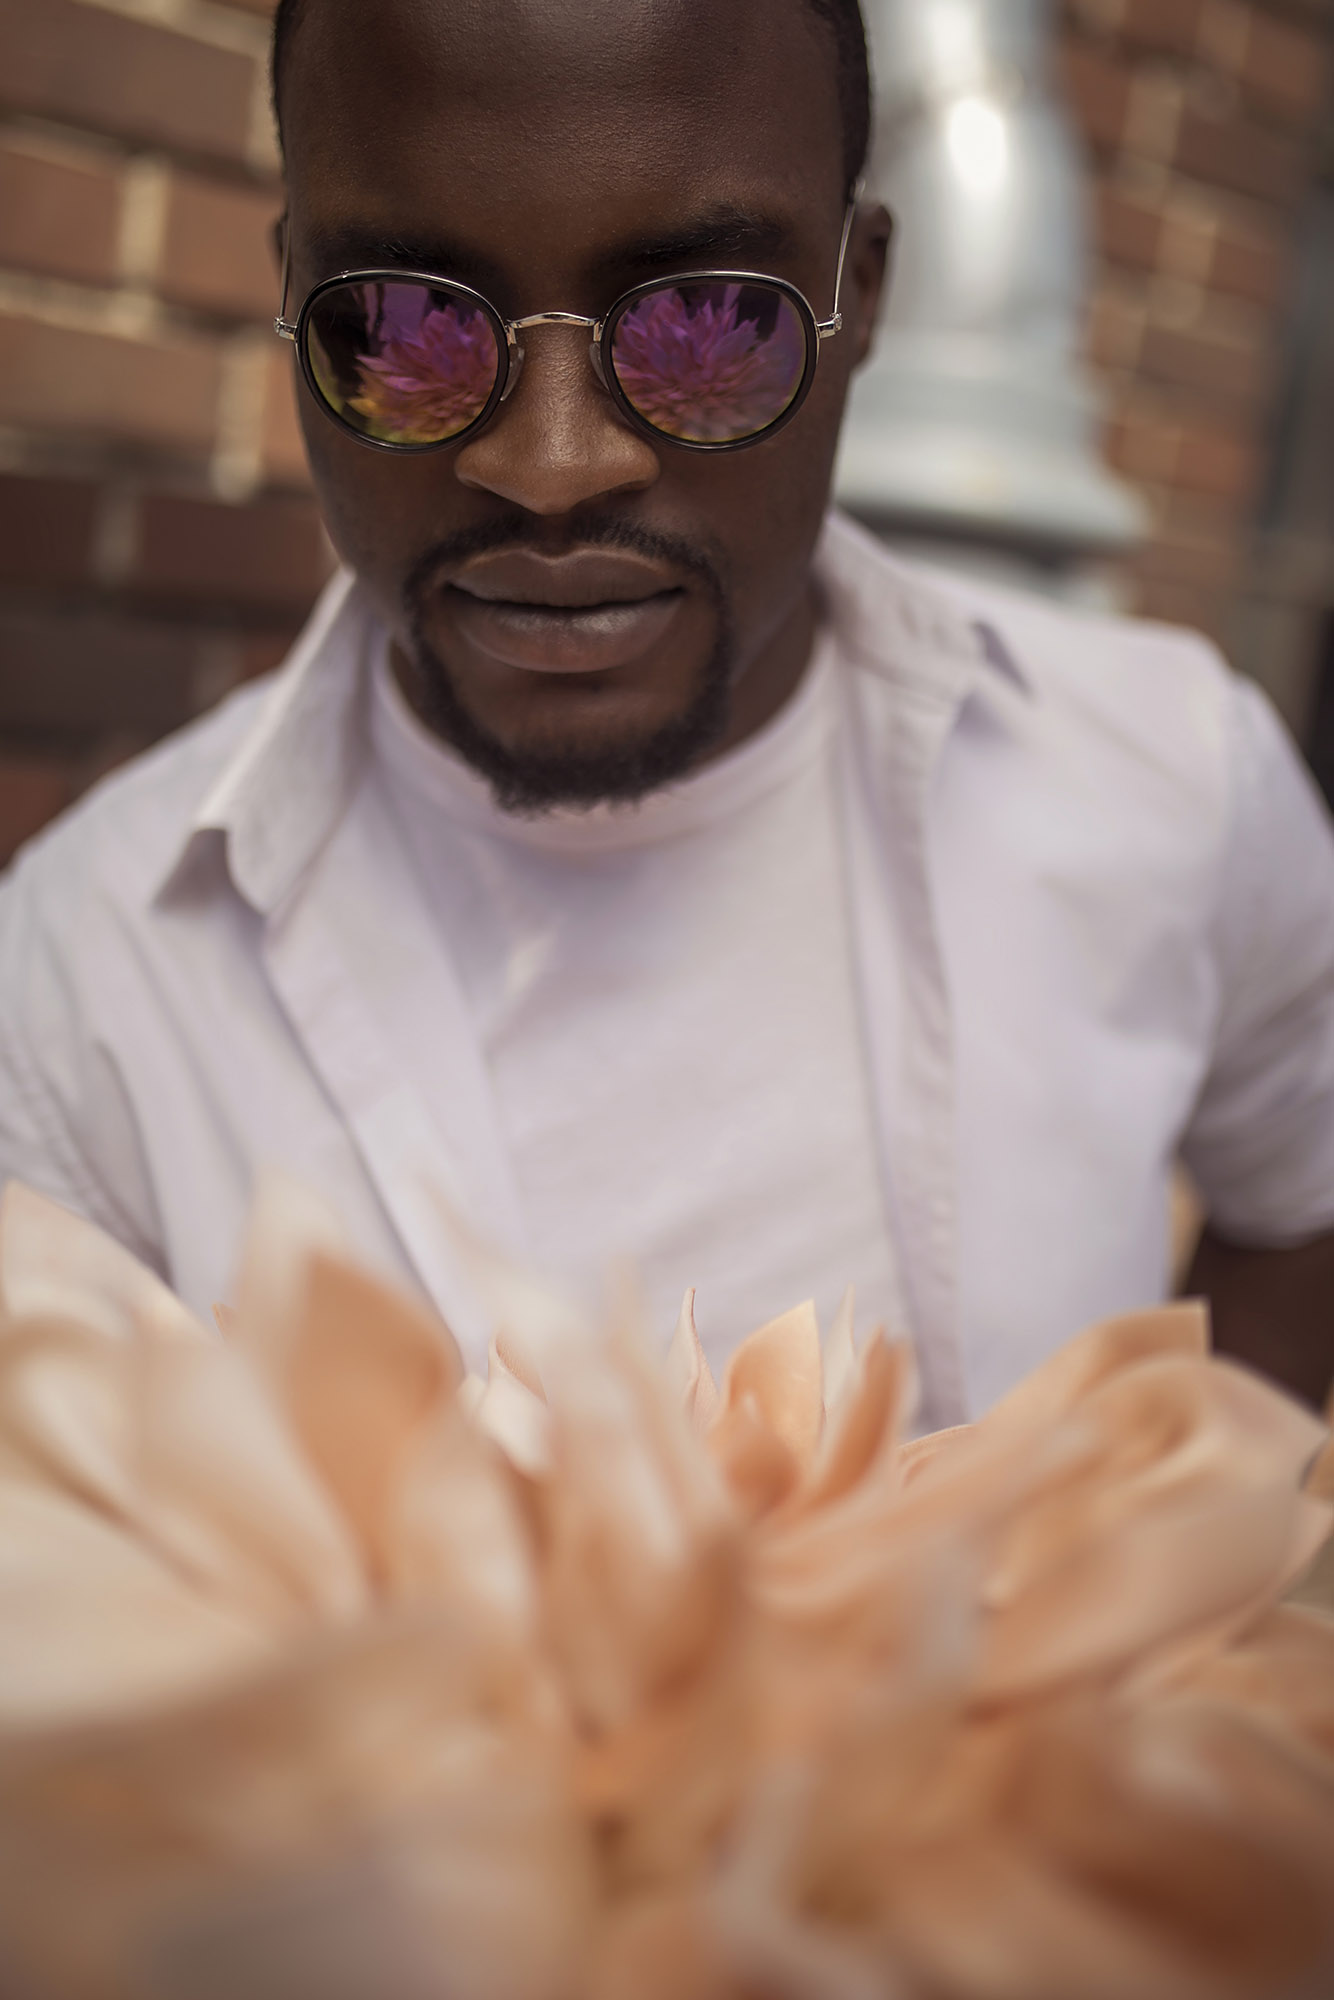 Black man wearing sunglasses with a flower